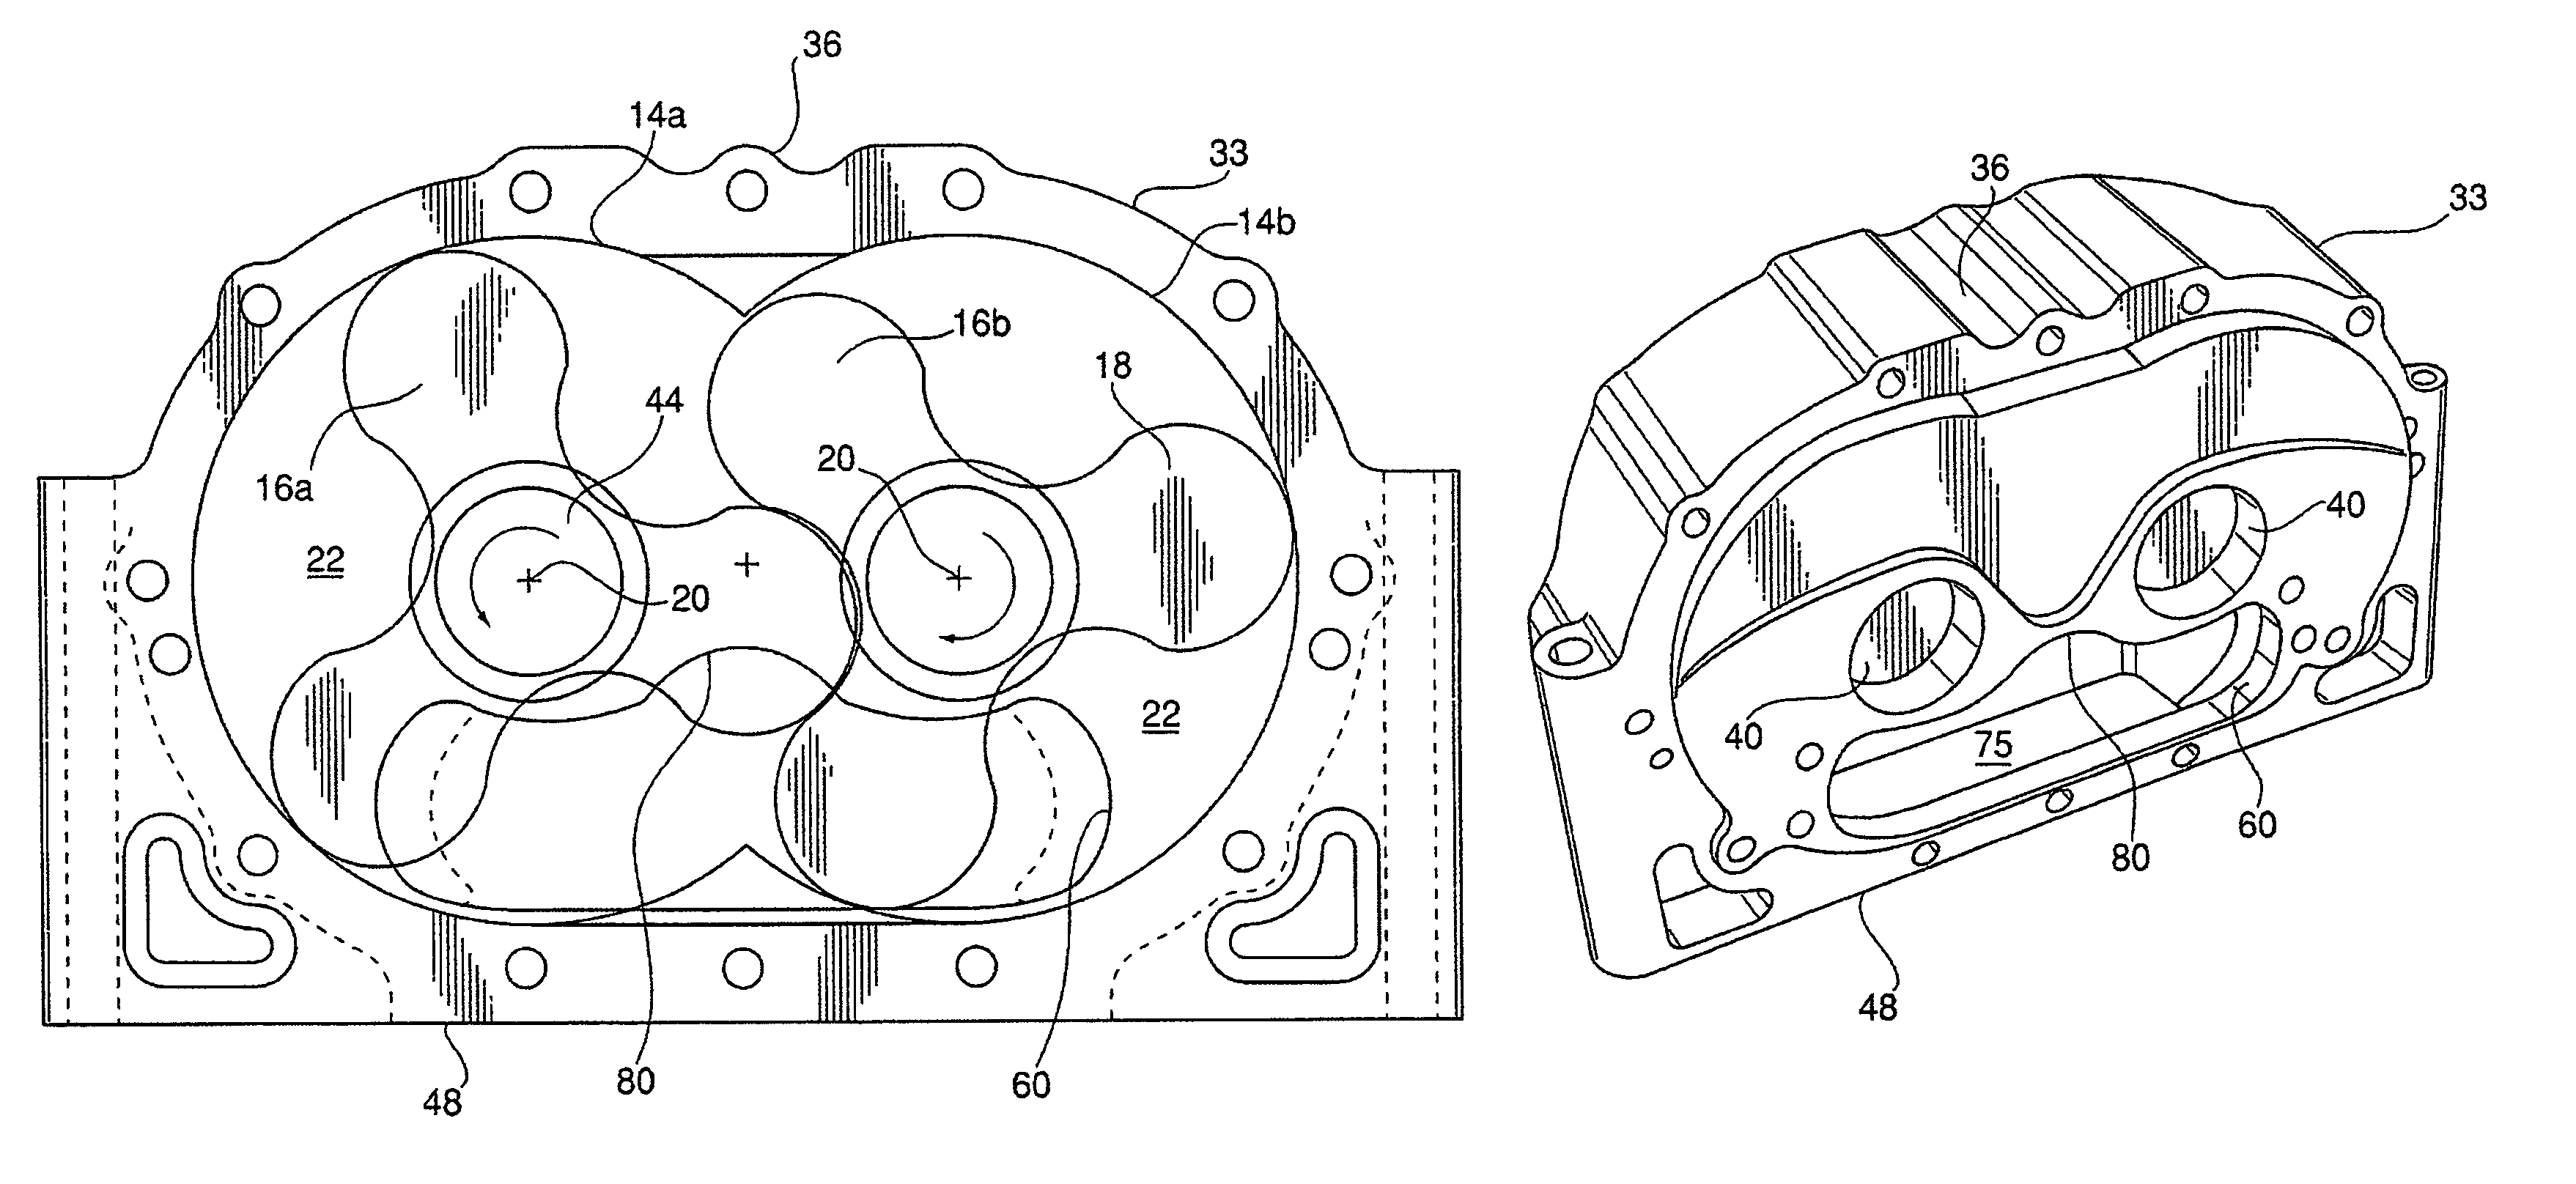 Roots type gear compressor with helical lobes having feedback cavity